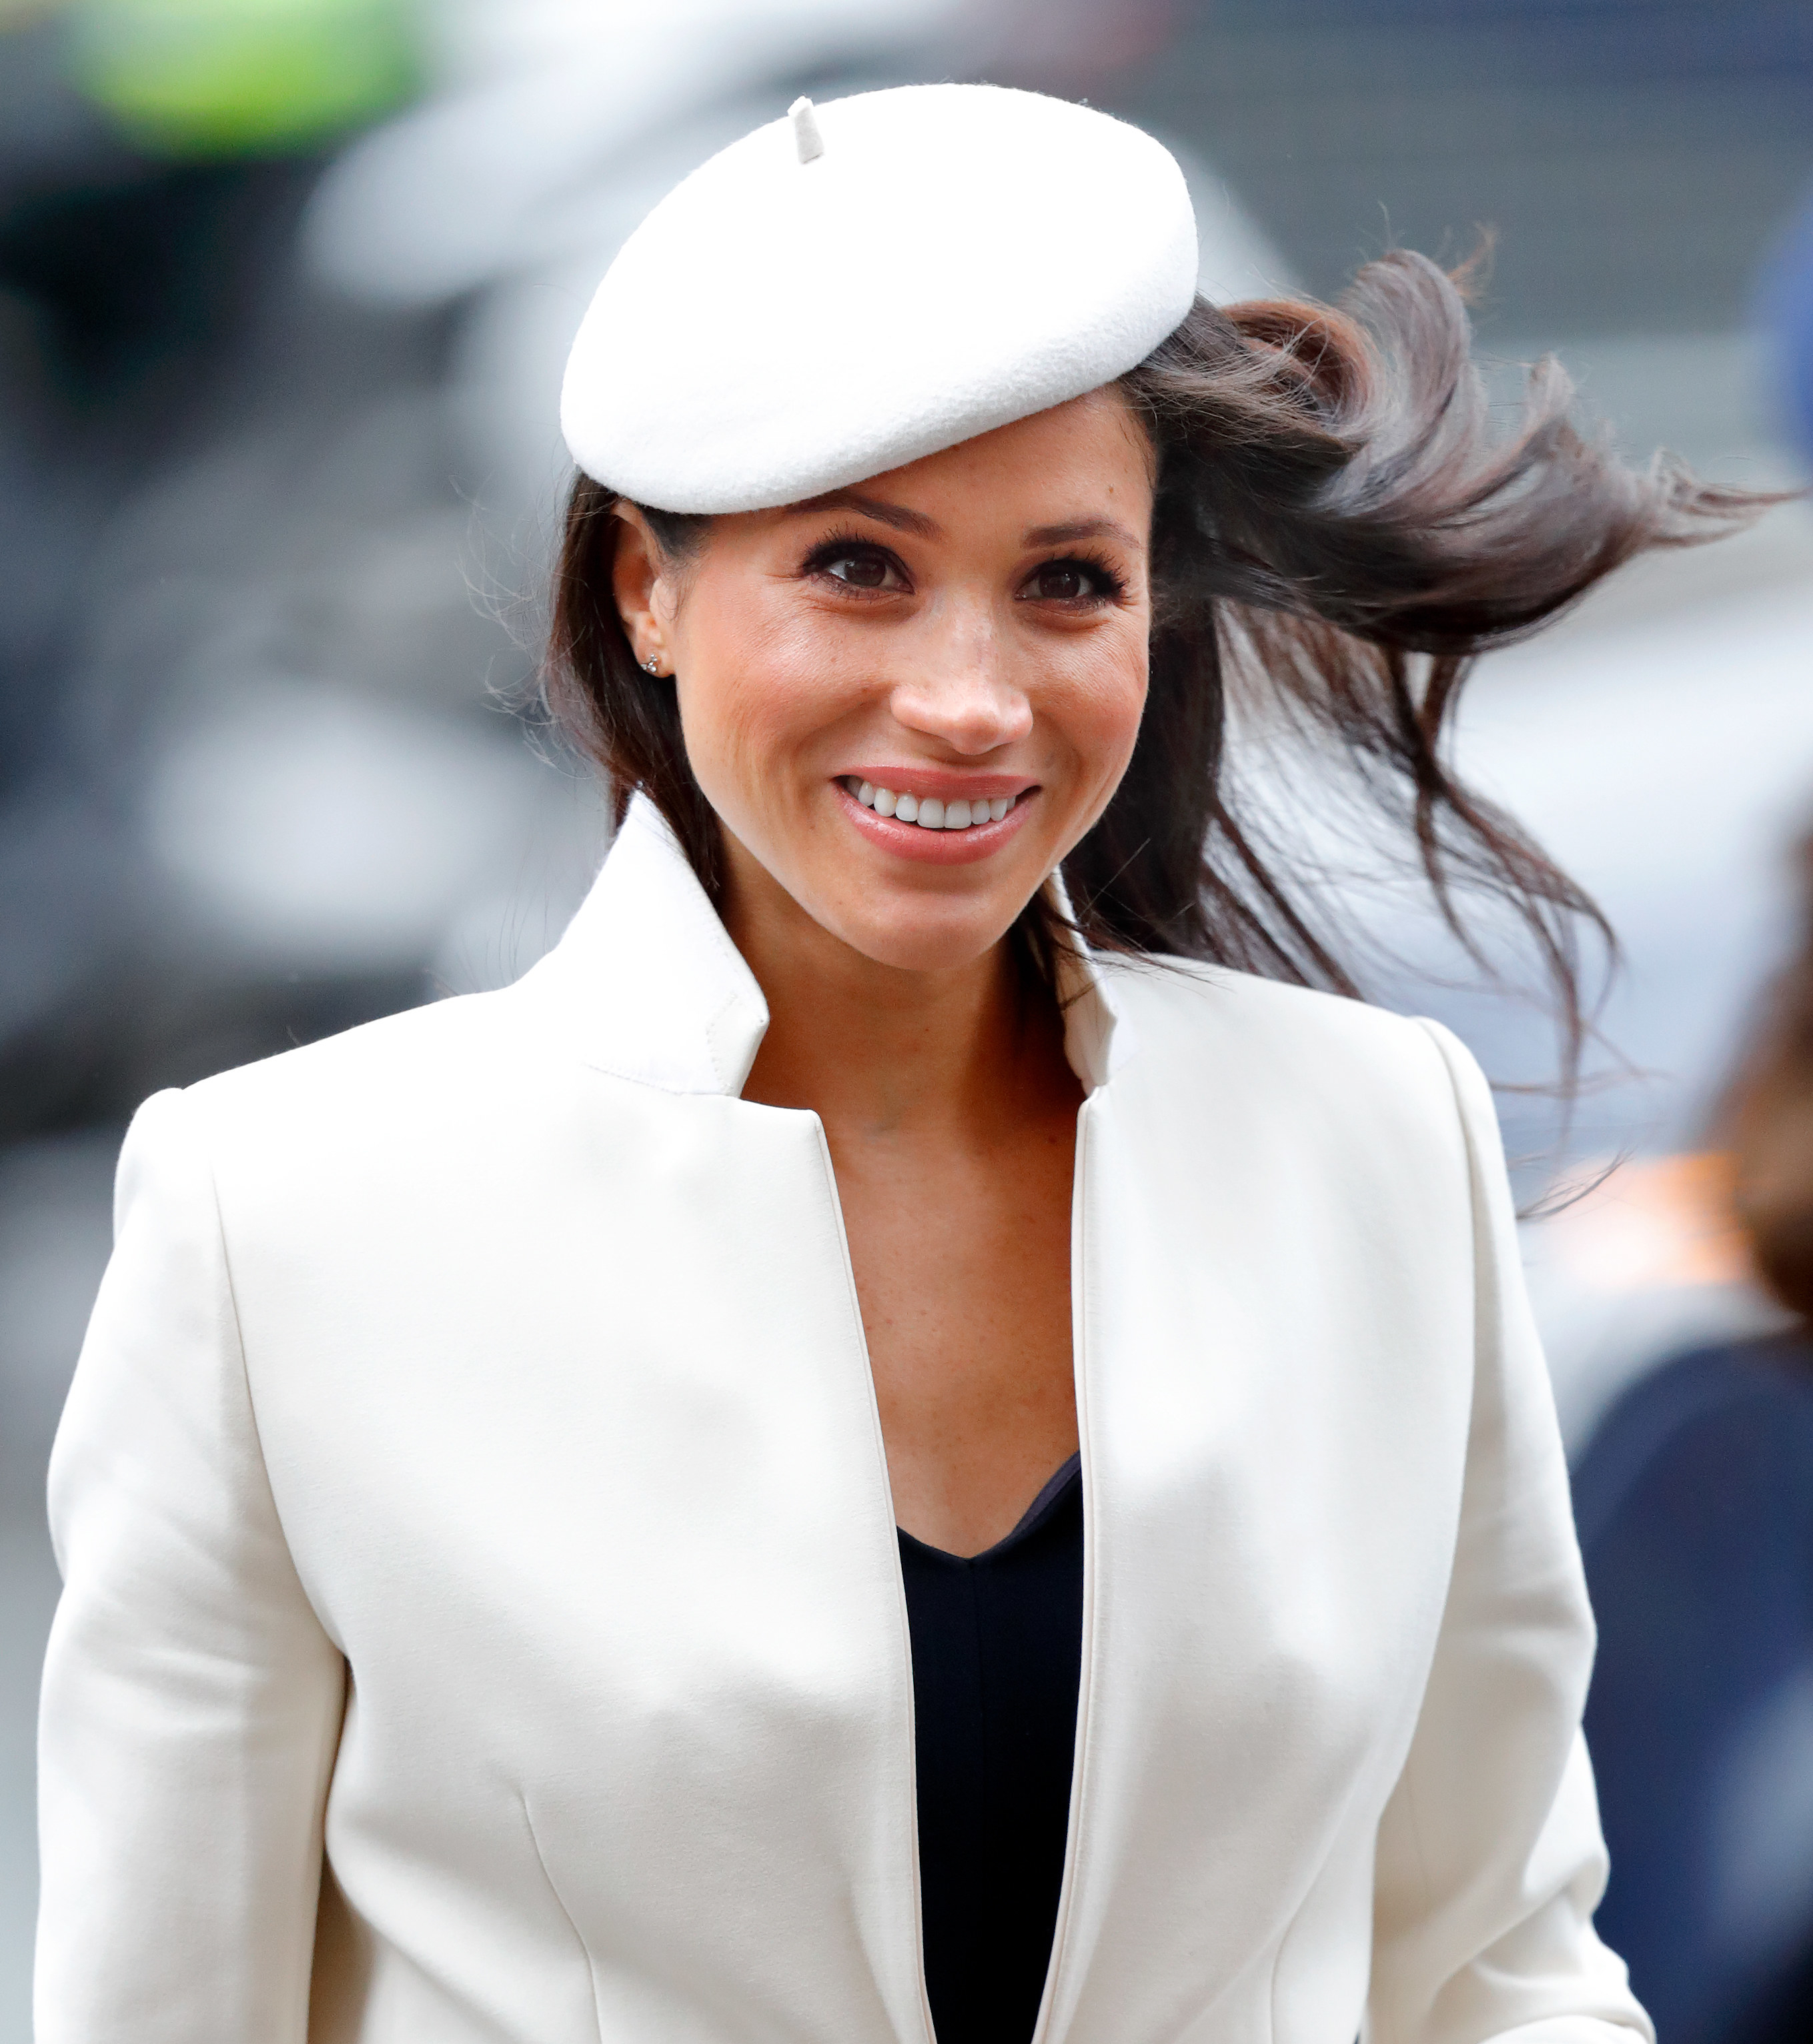 Meghan Markle in a white suit.